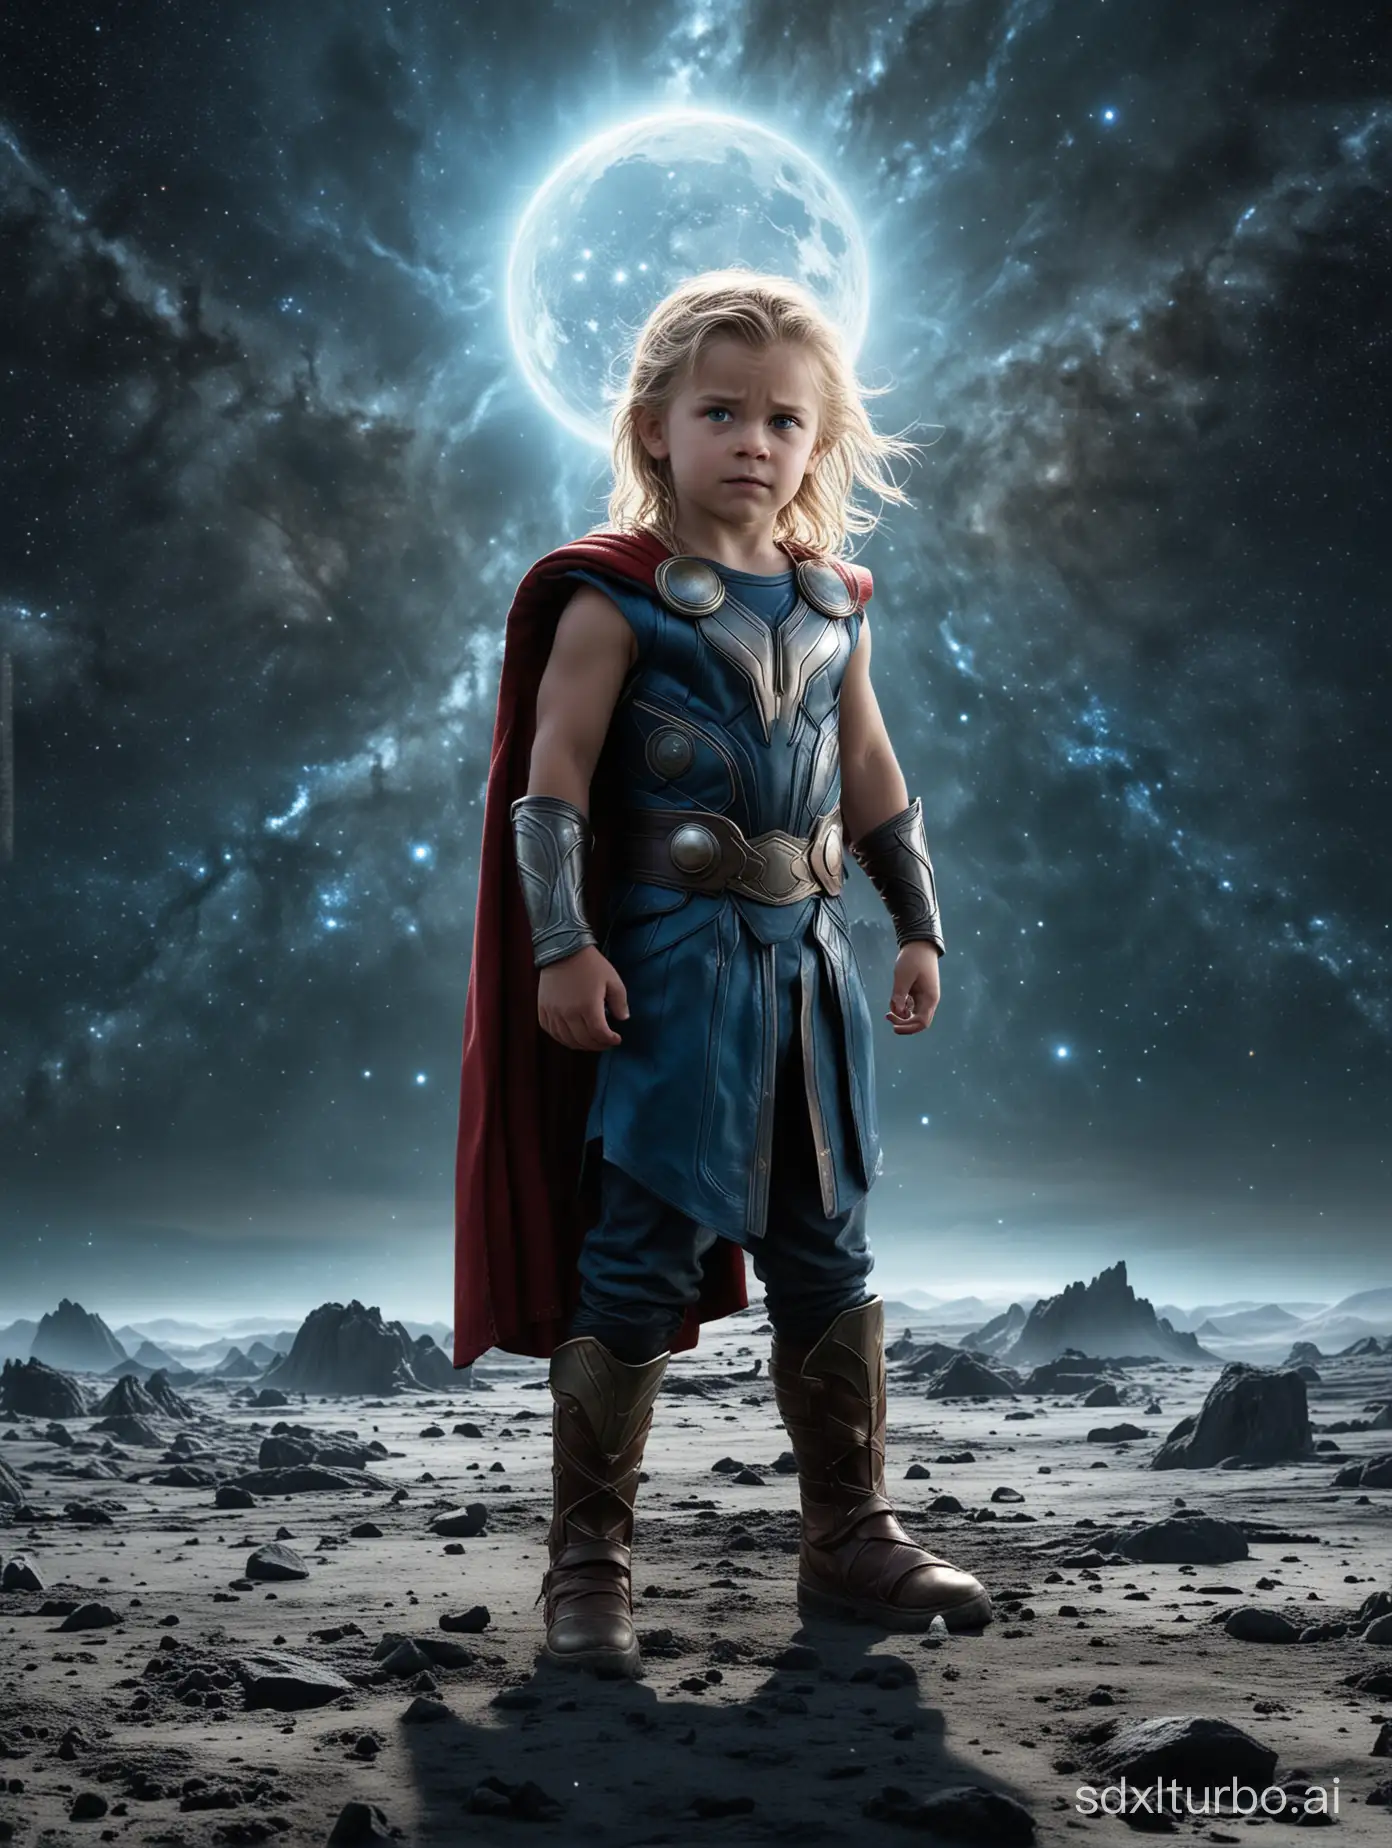 A child, full body, facing the camera, visible facial features and hair, transformed into the thunder god Thor standing on the surface of the moon, with a blue planet behind him, the Milky Way galaxy appearing faintly.